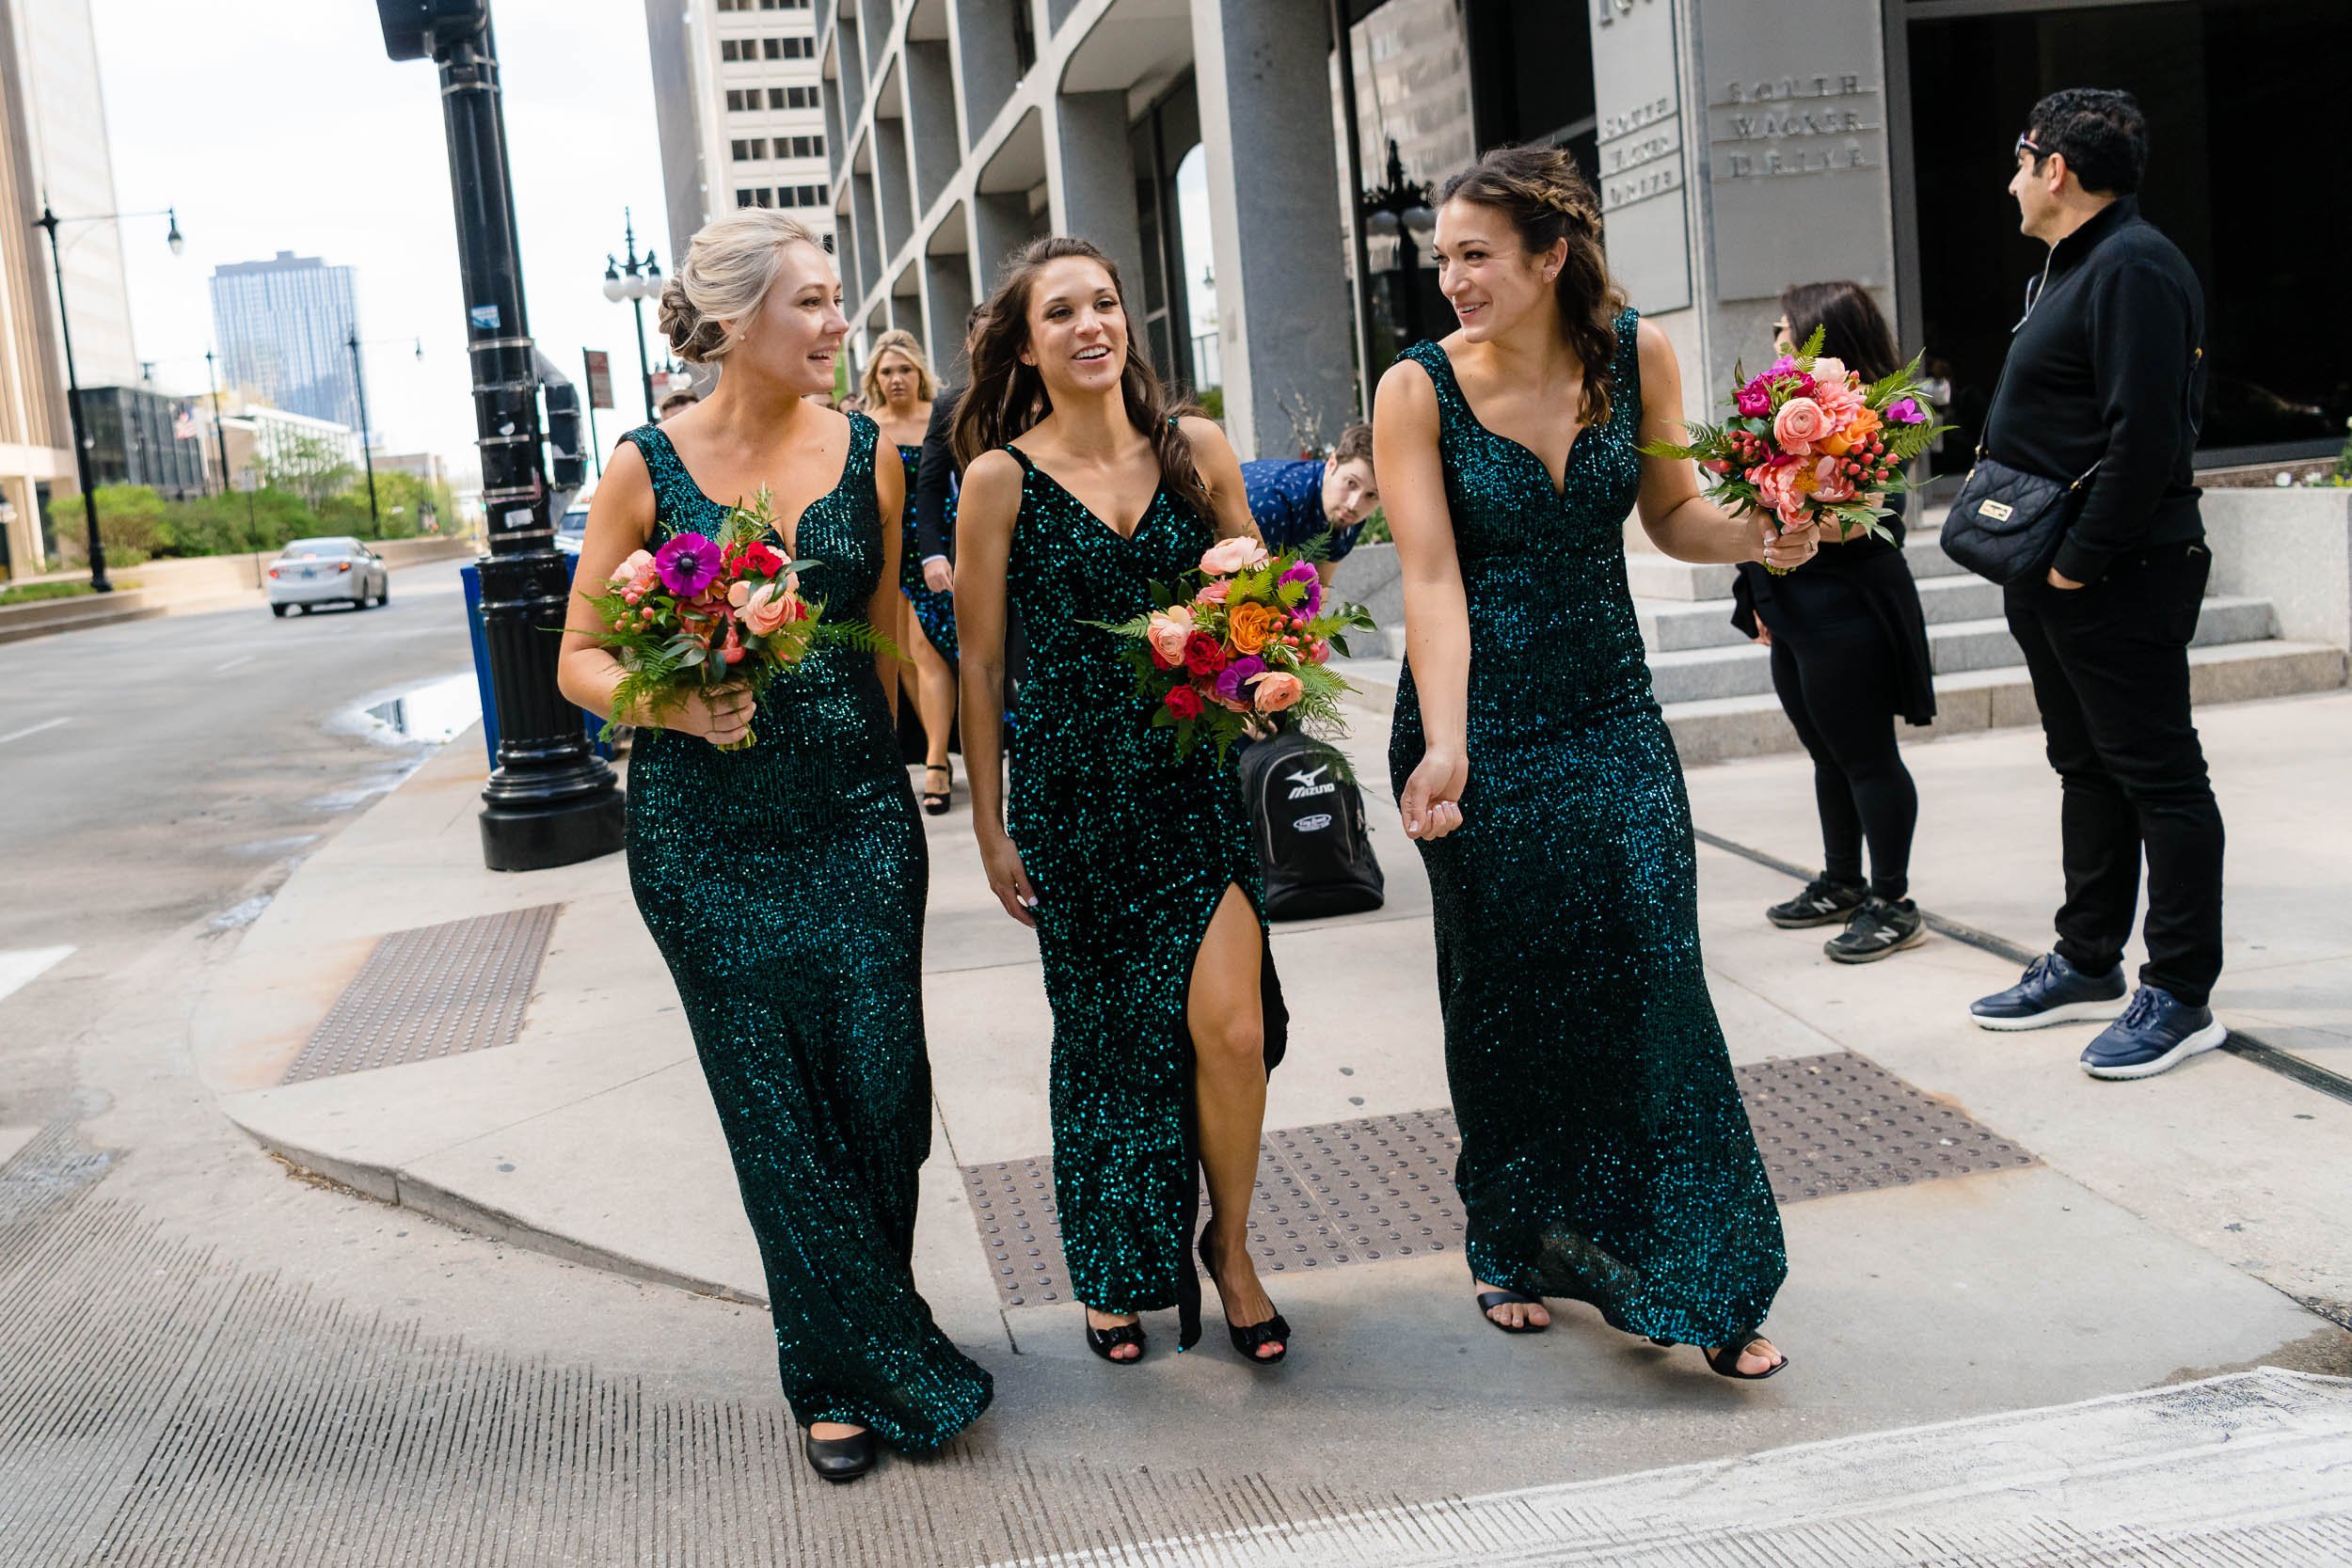 Pazzo's at 311 | outdoor wedding party photo | Chicago IL